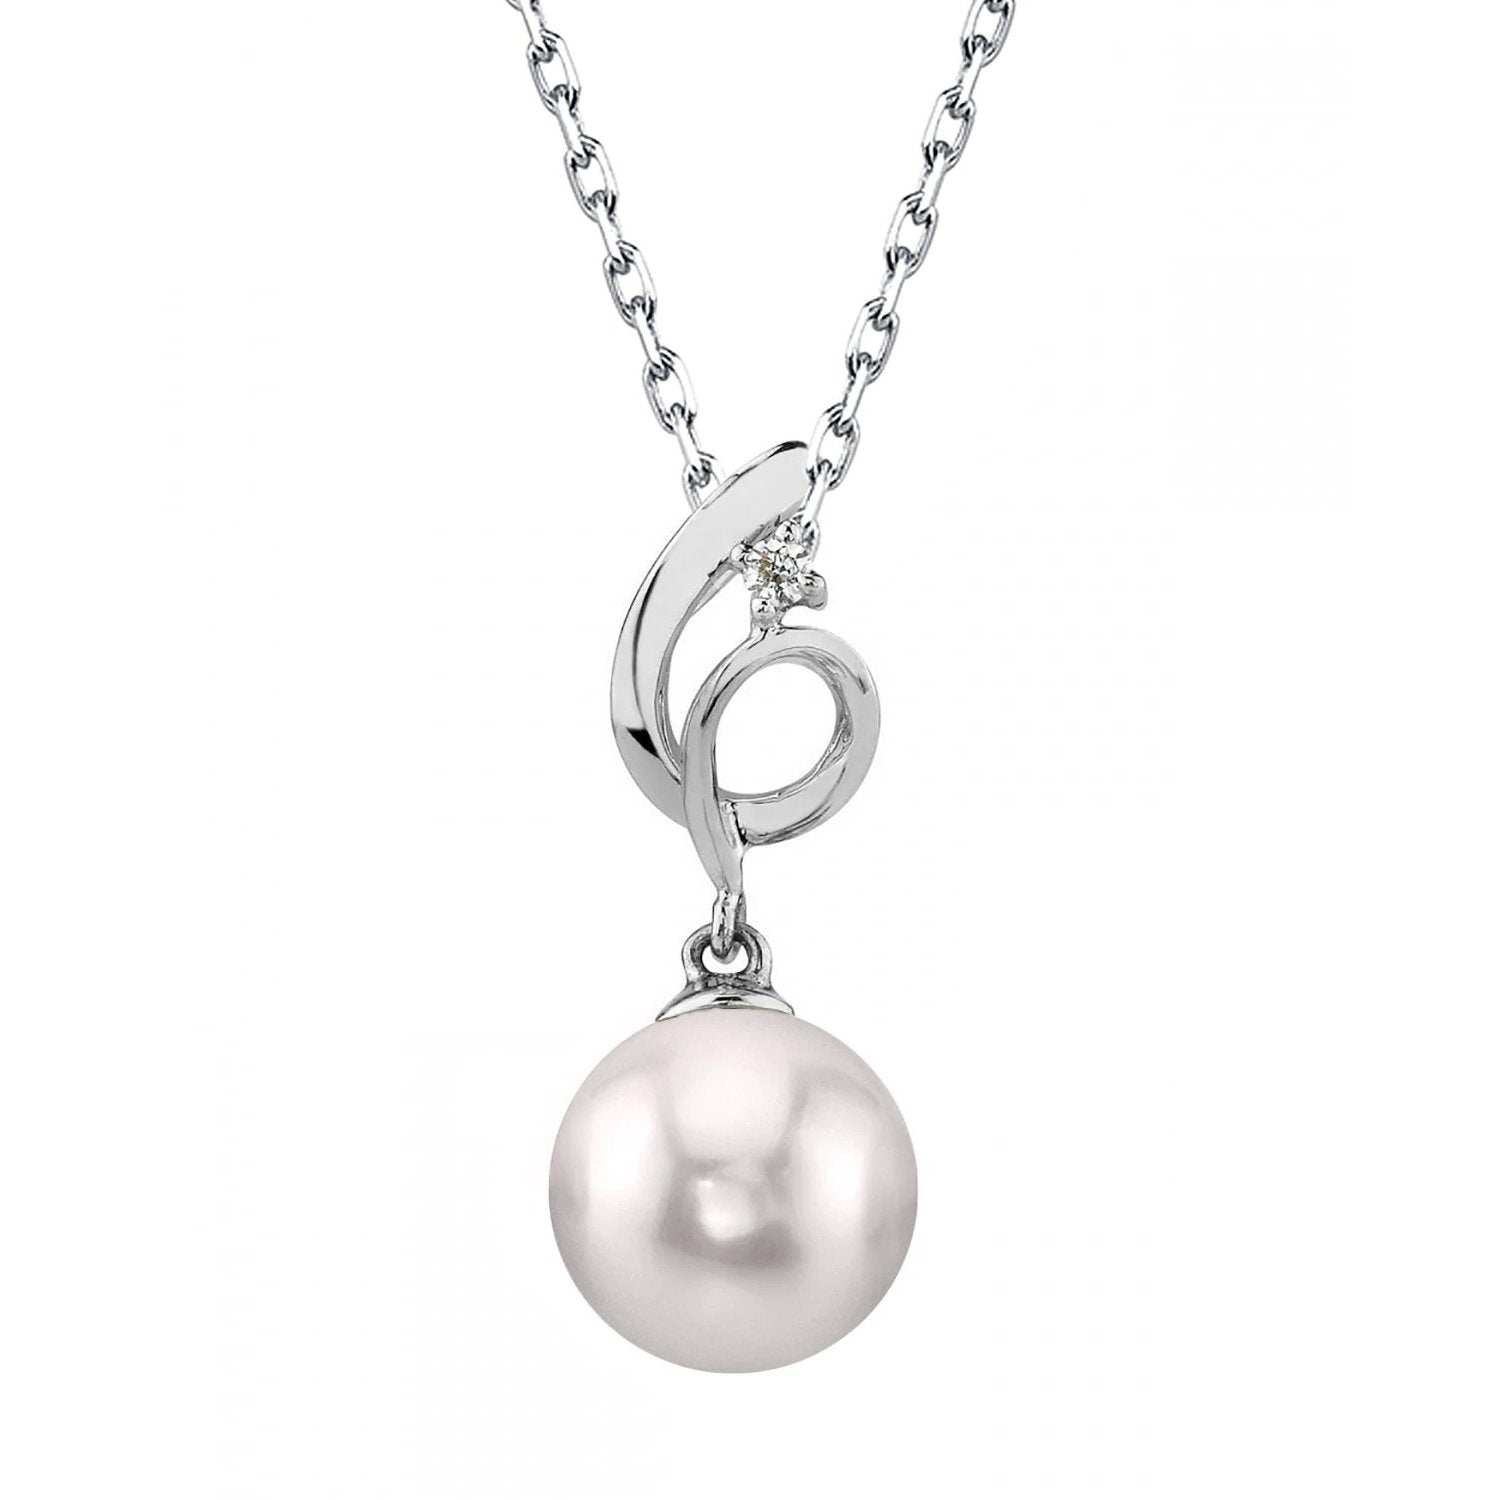 Closer shot showing details of Akoya Pearl and Diamond Symphony Pendant